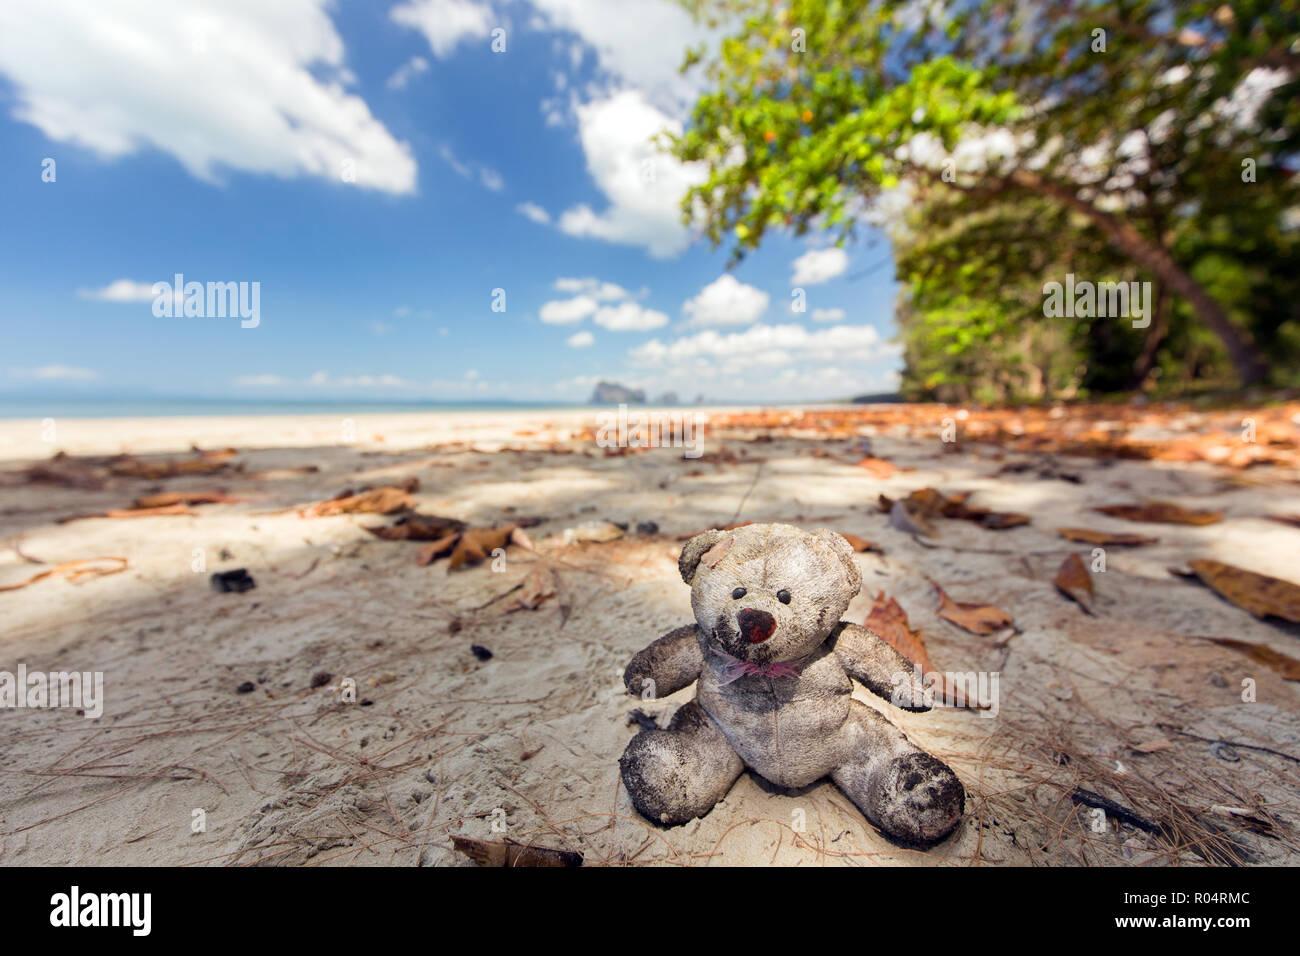 Teddy bear beached on tropical wild beach in the Trang province in Thailand. Stock Photo